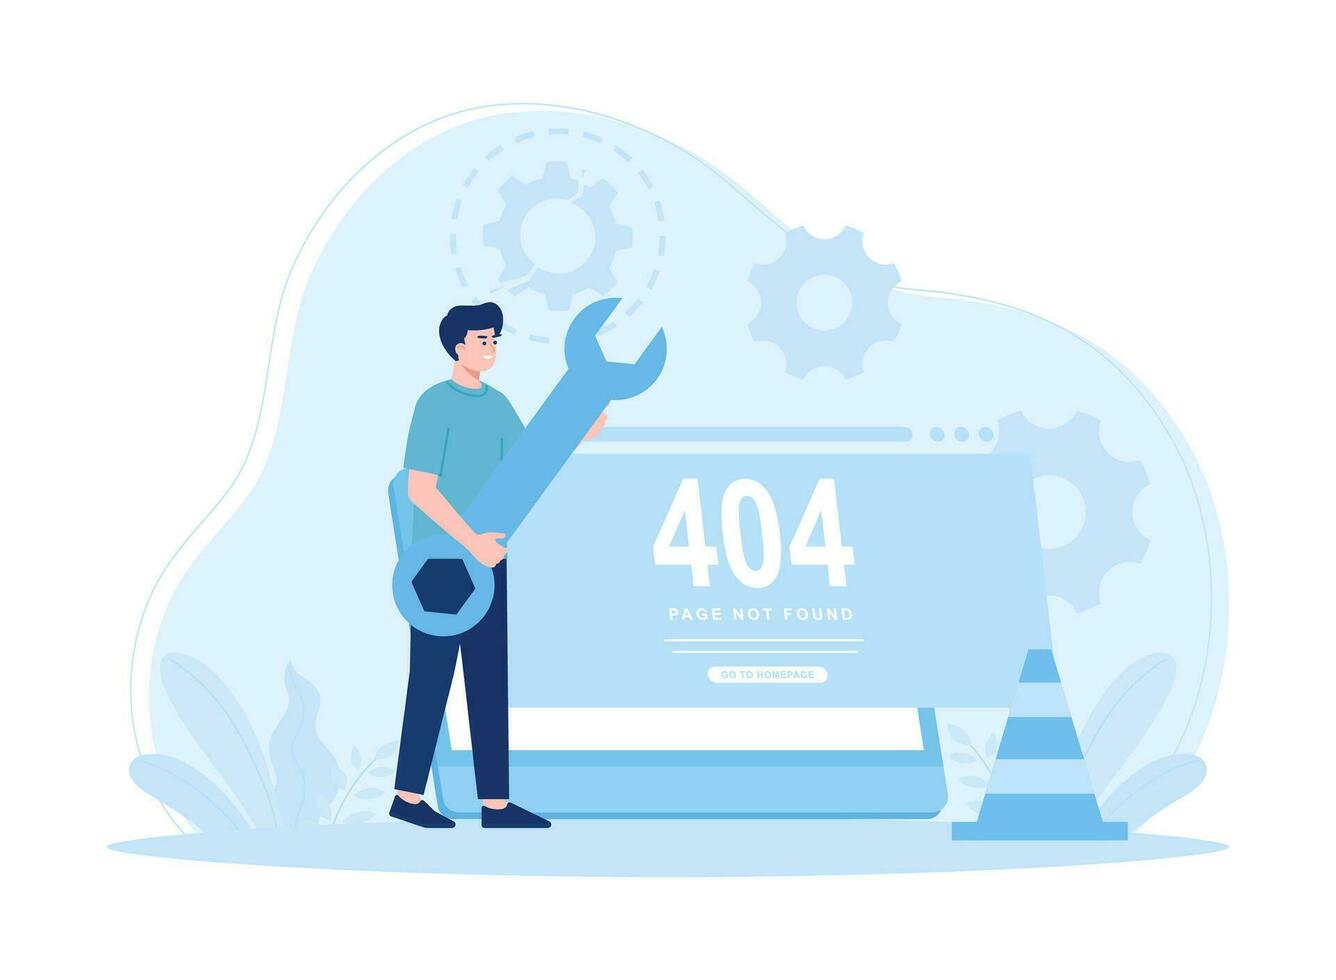 internet repair service 404 error page error or internet problem not found on the network concept flat illustration vector